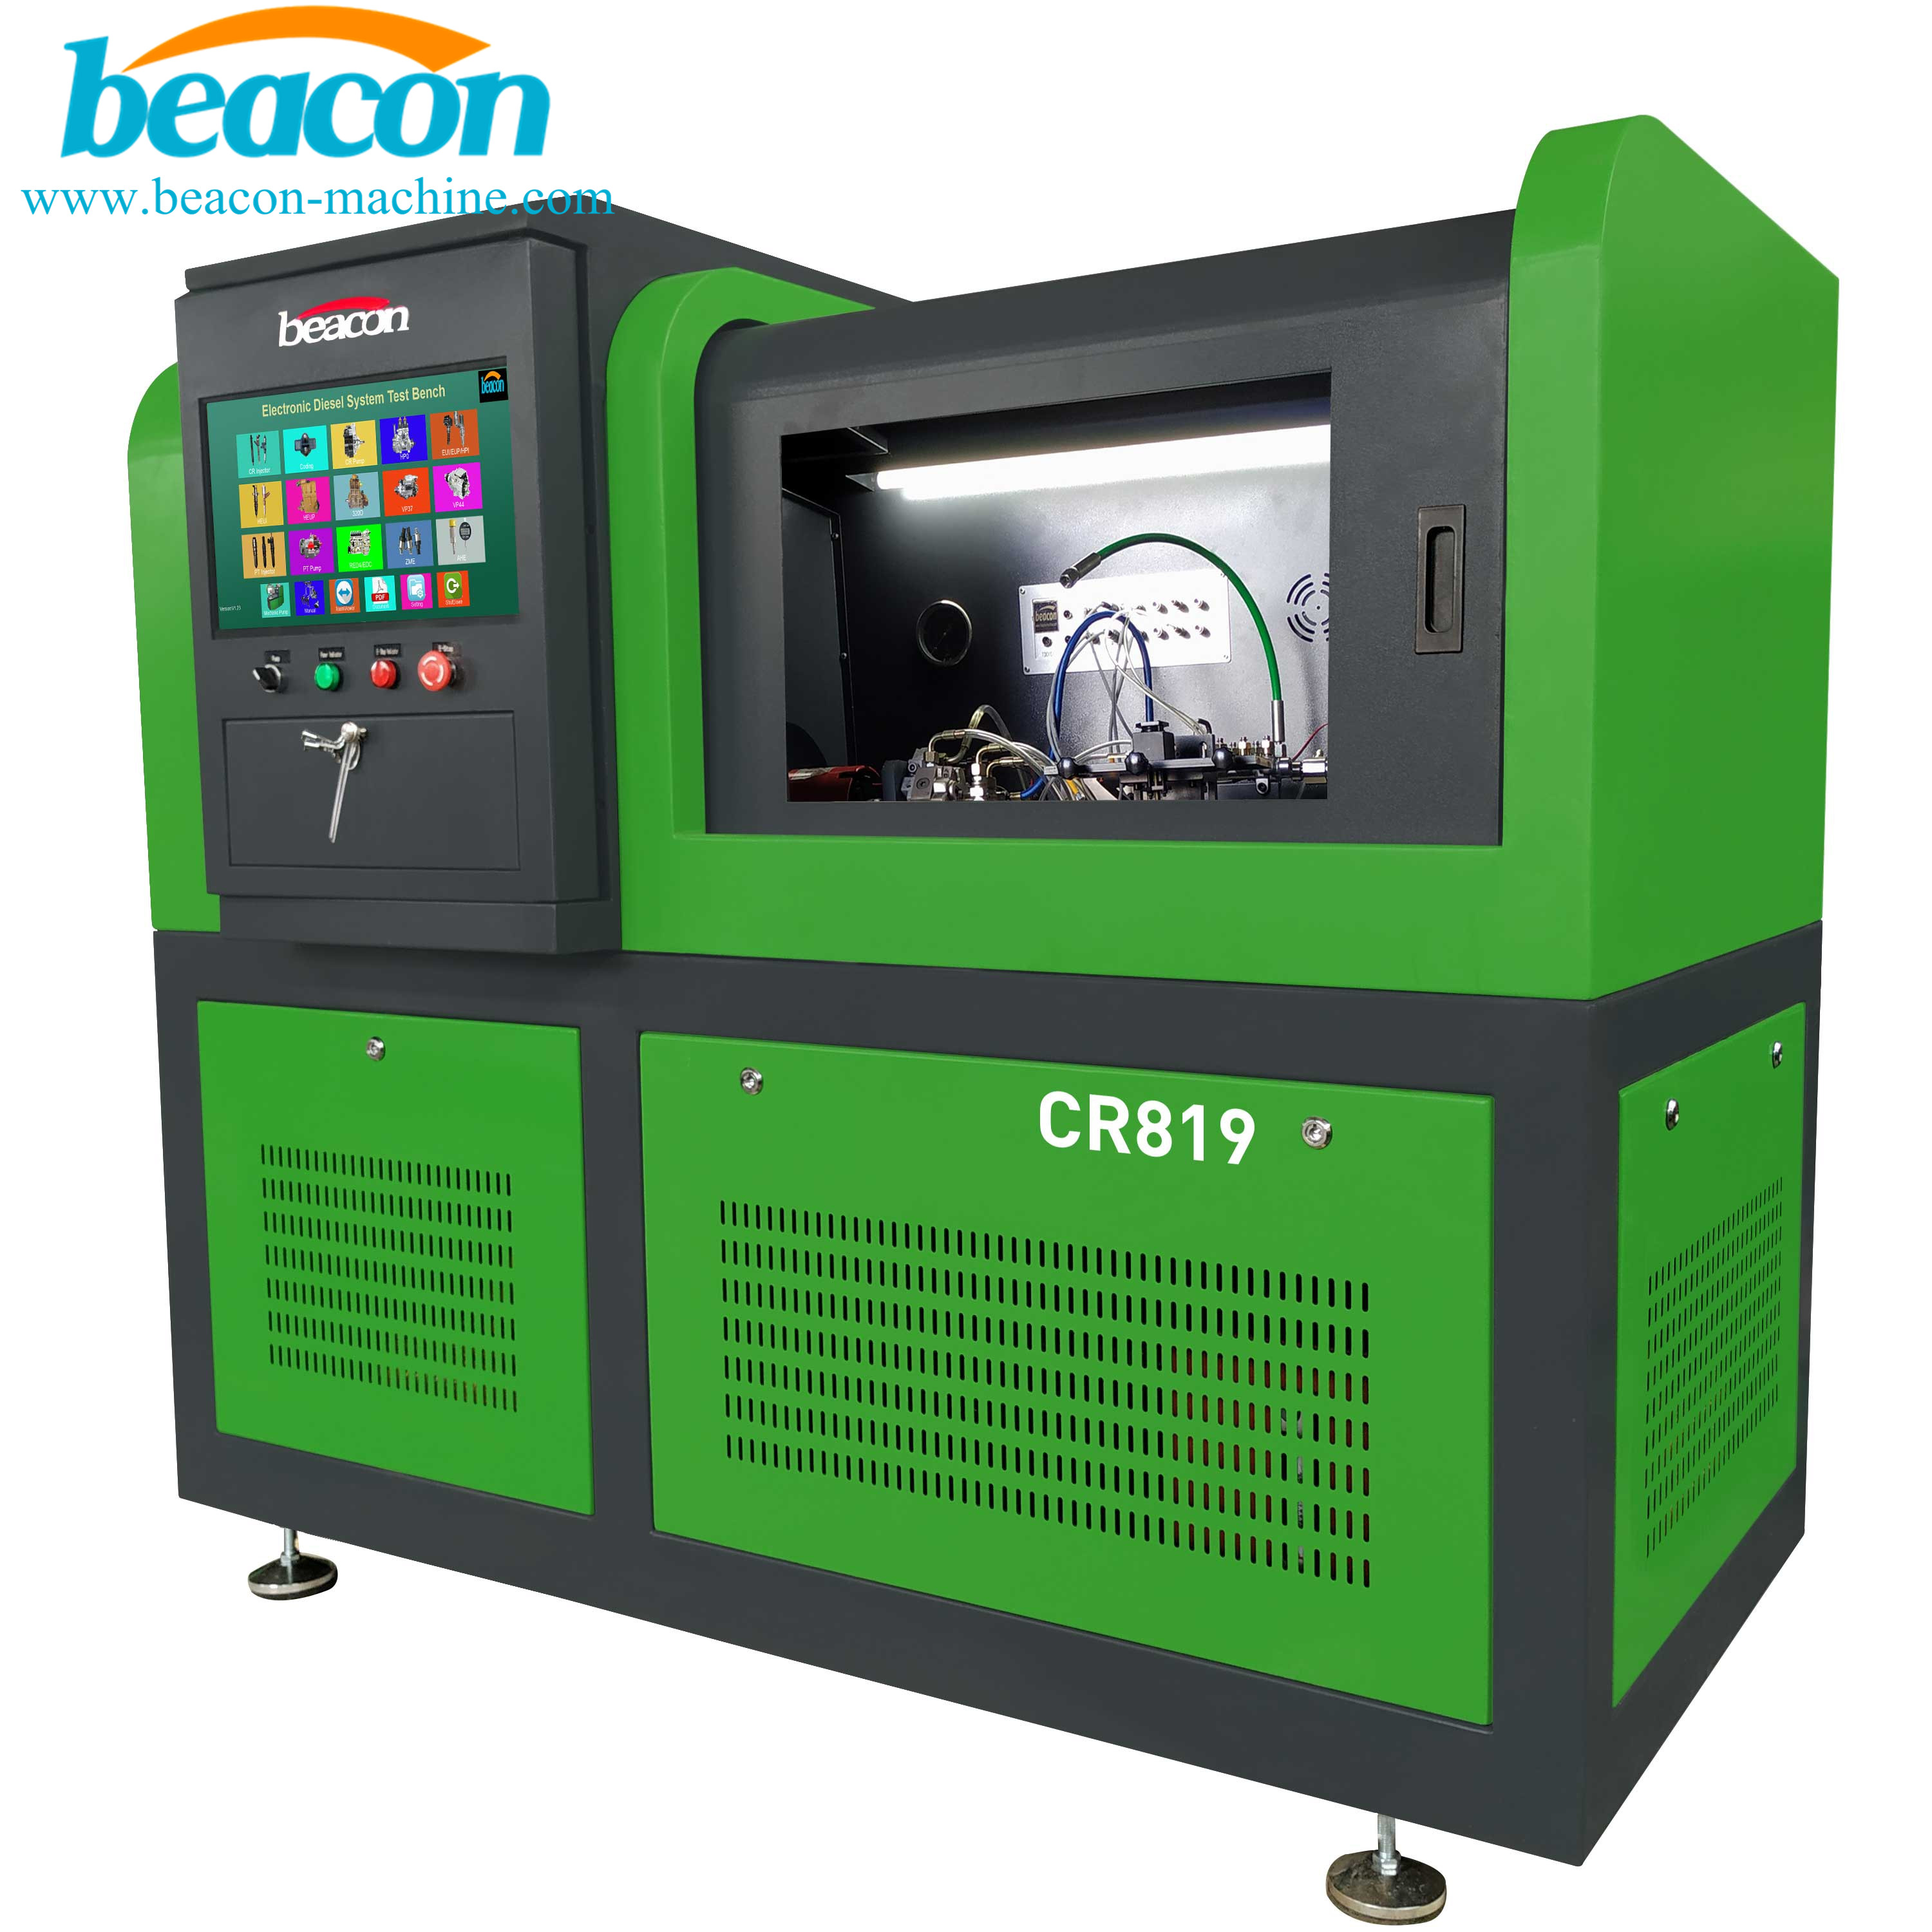 CR819 common rail diesel fuel piezo injector pump test bench with coding BIP function